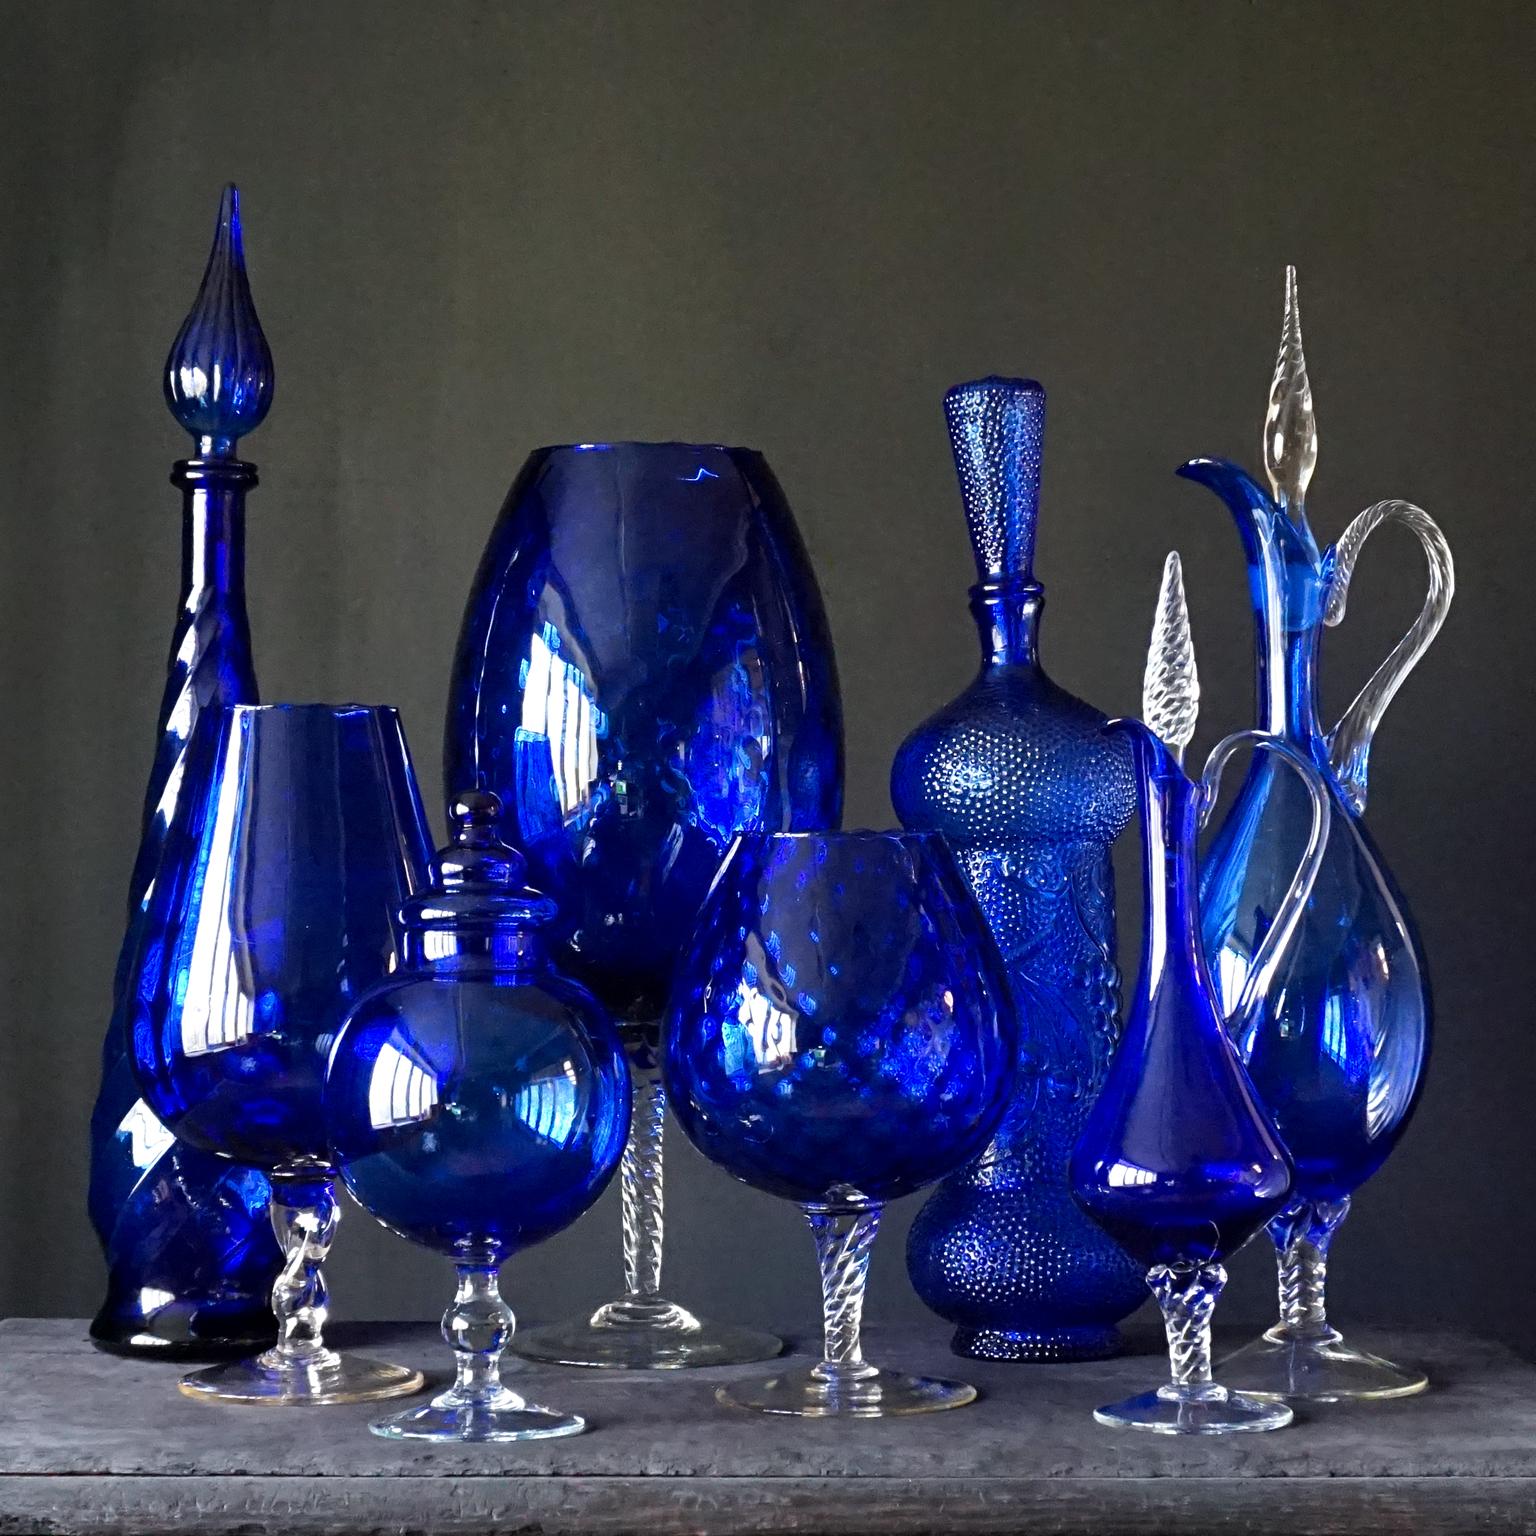 Very decorative midcentury blue set of eight different Size large Italian glass pressed genie bottles and blown clear and blue glass vases and a candy jar in different shapes in a deep shade of cobalt blue.

Produced in midcentury Empoli, Florence